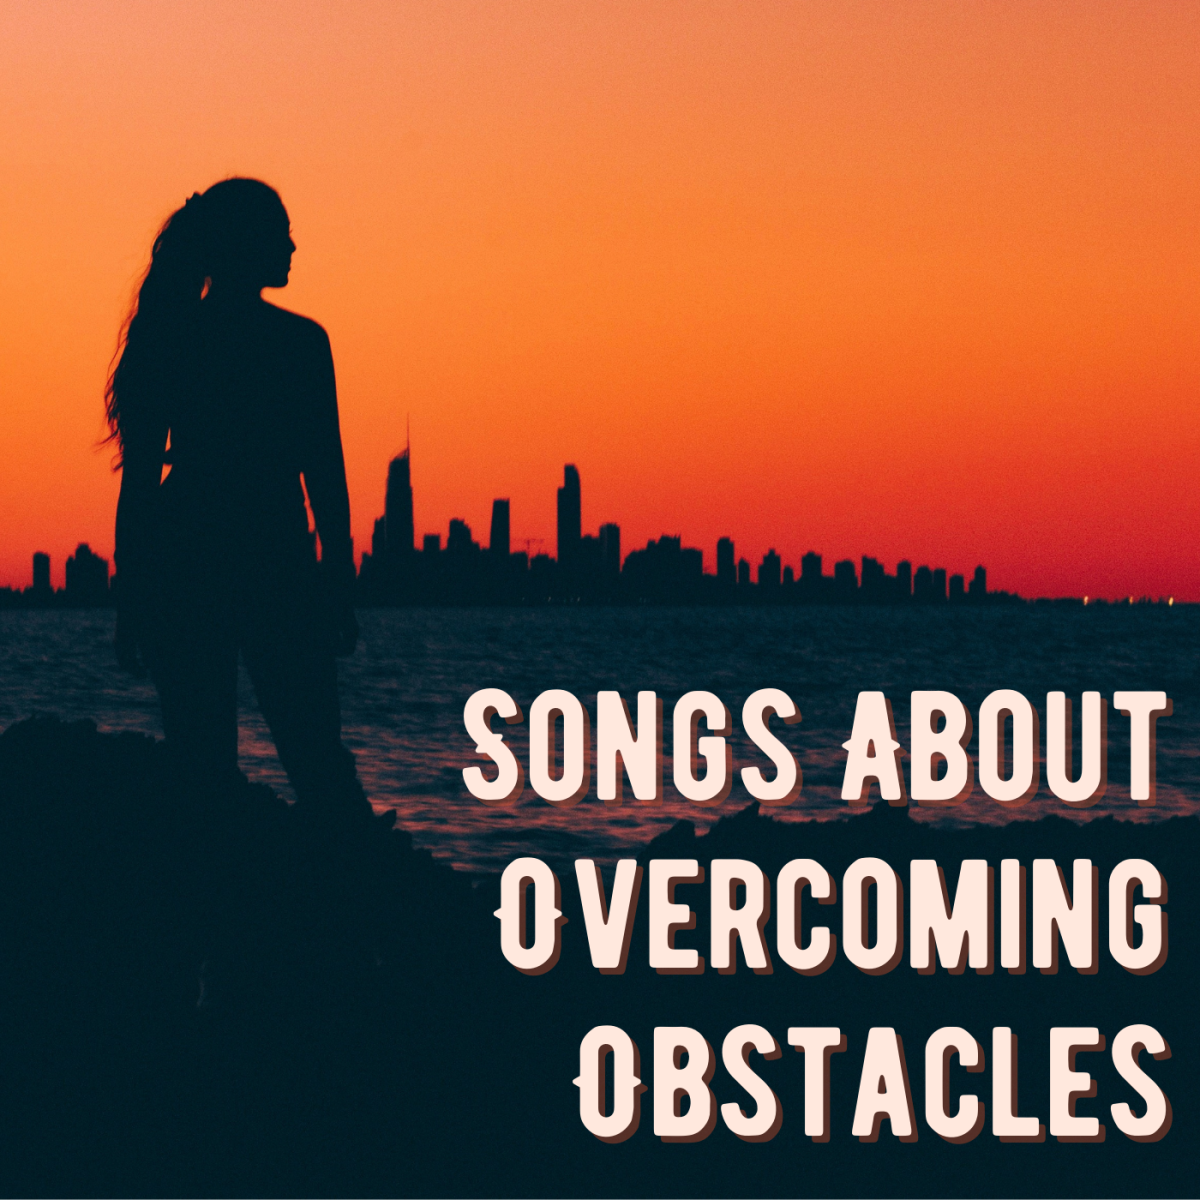 52 Songs About Overcoming Obstacles, Adversity, Hard Times, Challenges, and Not Giving Up